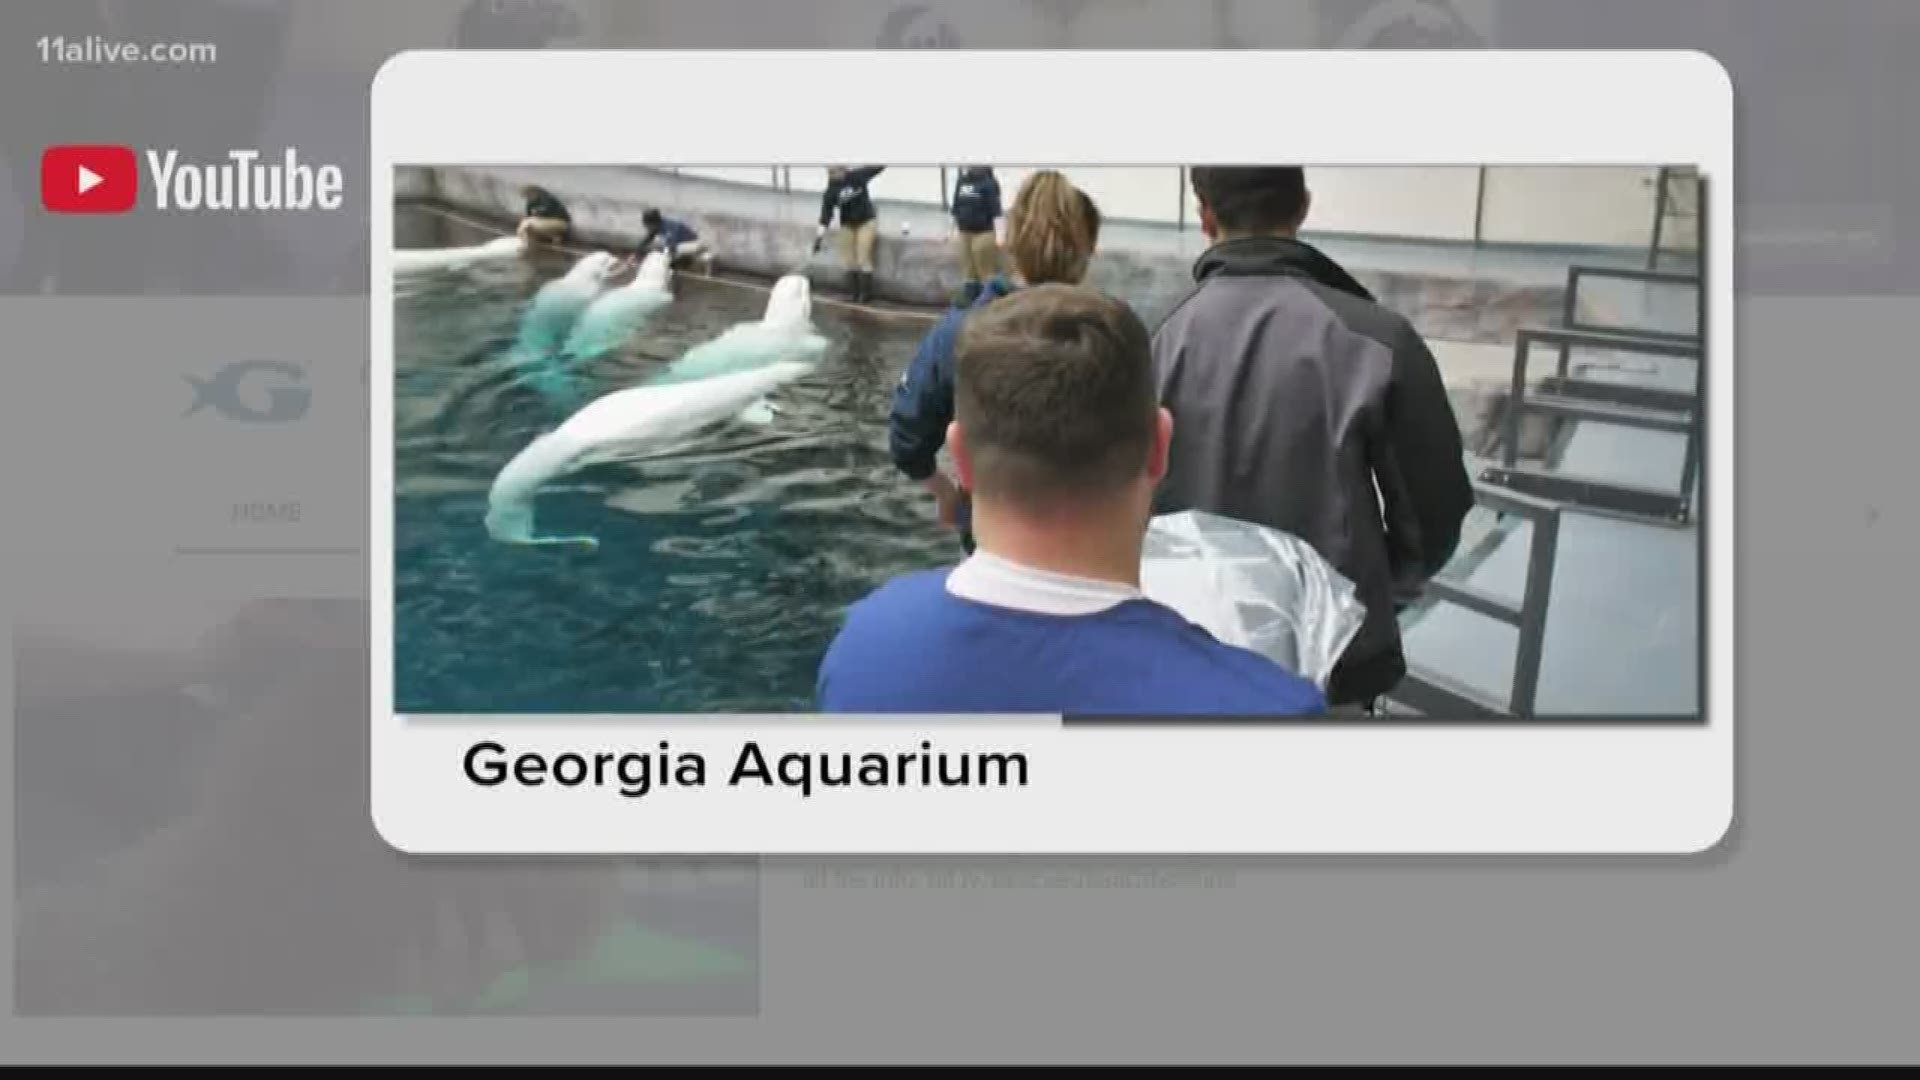 The 20-year-old whale came to the aquarium in February last year from SeaWorld Orlando.